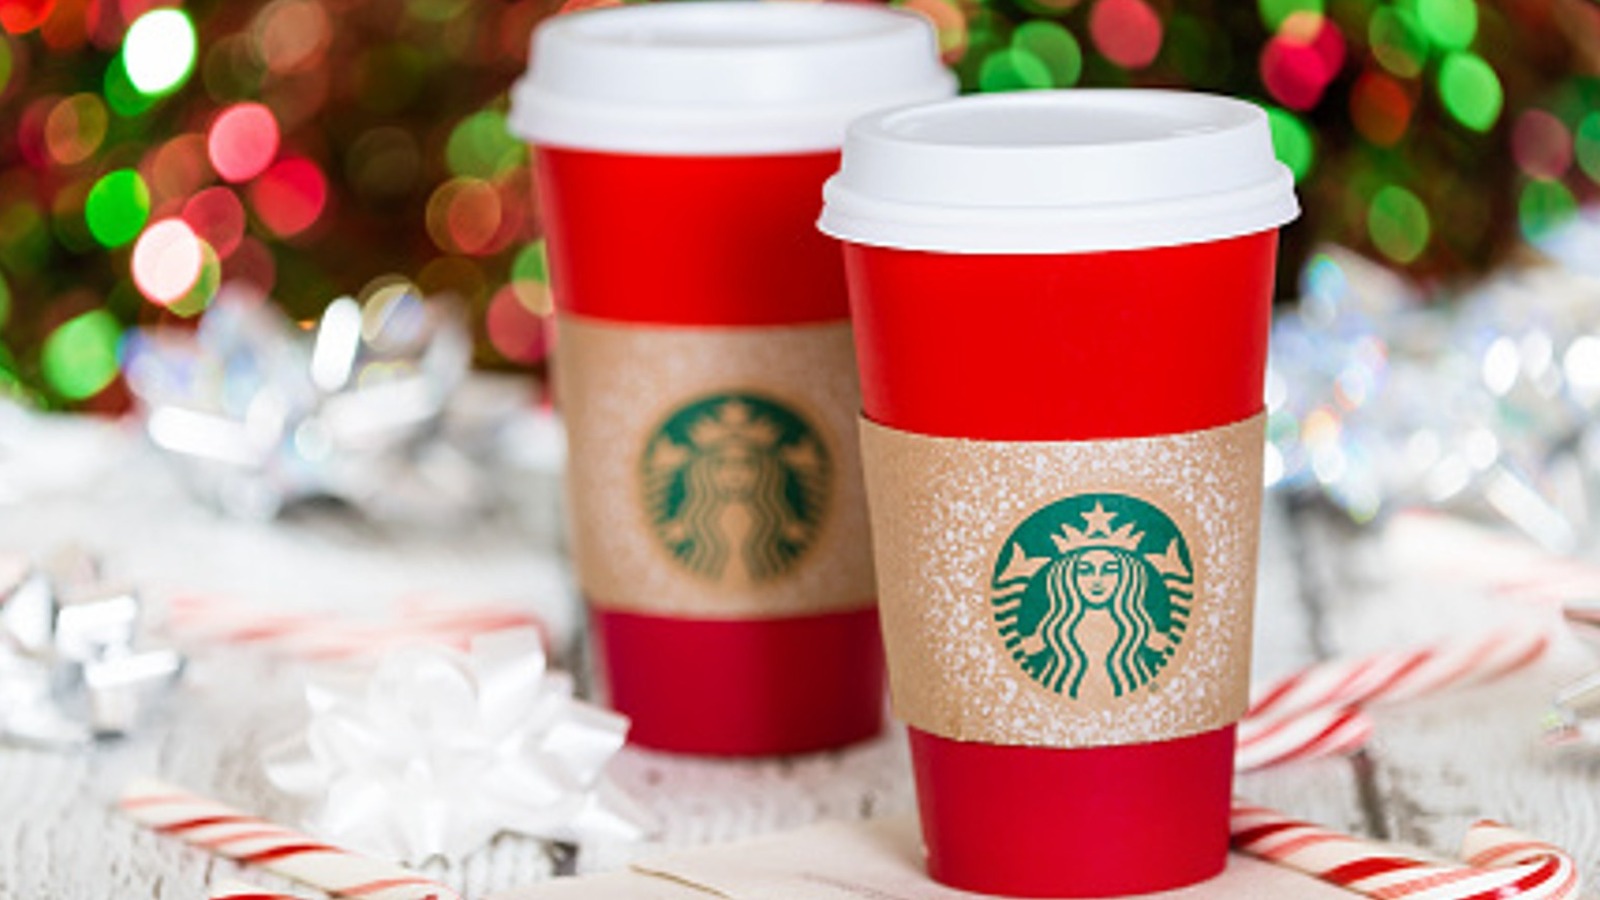 https://www.mashed.com/img/gallery/fall-just-started-and-starbucks-winter-menu-has-already-been-leaked/l-intro-1695673279.jpg